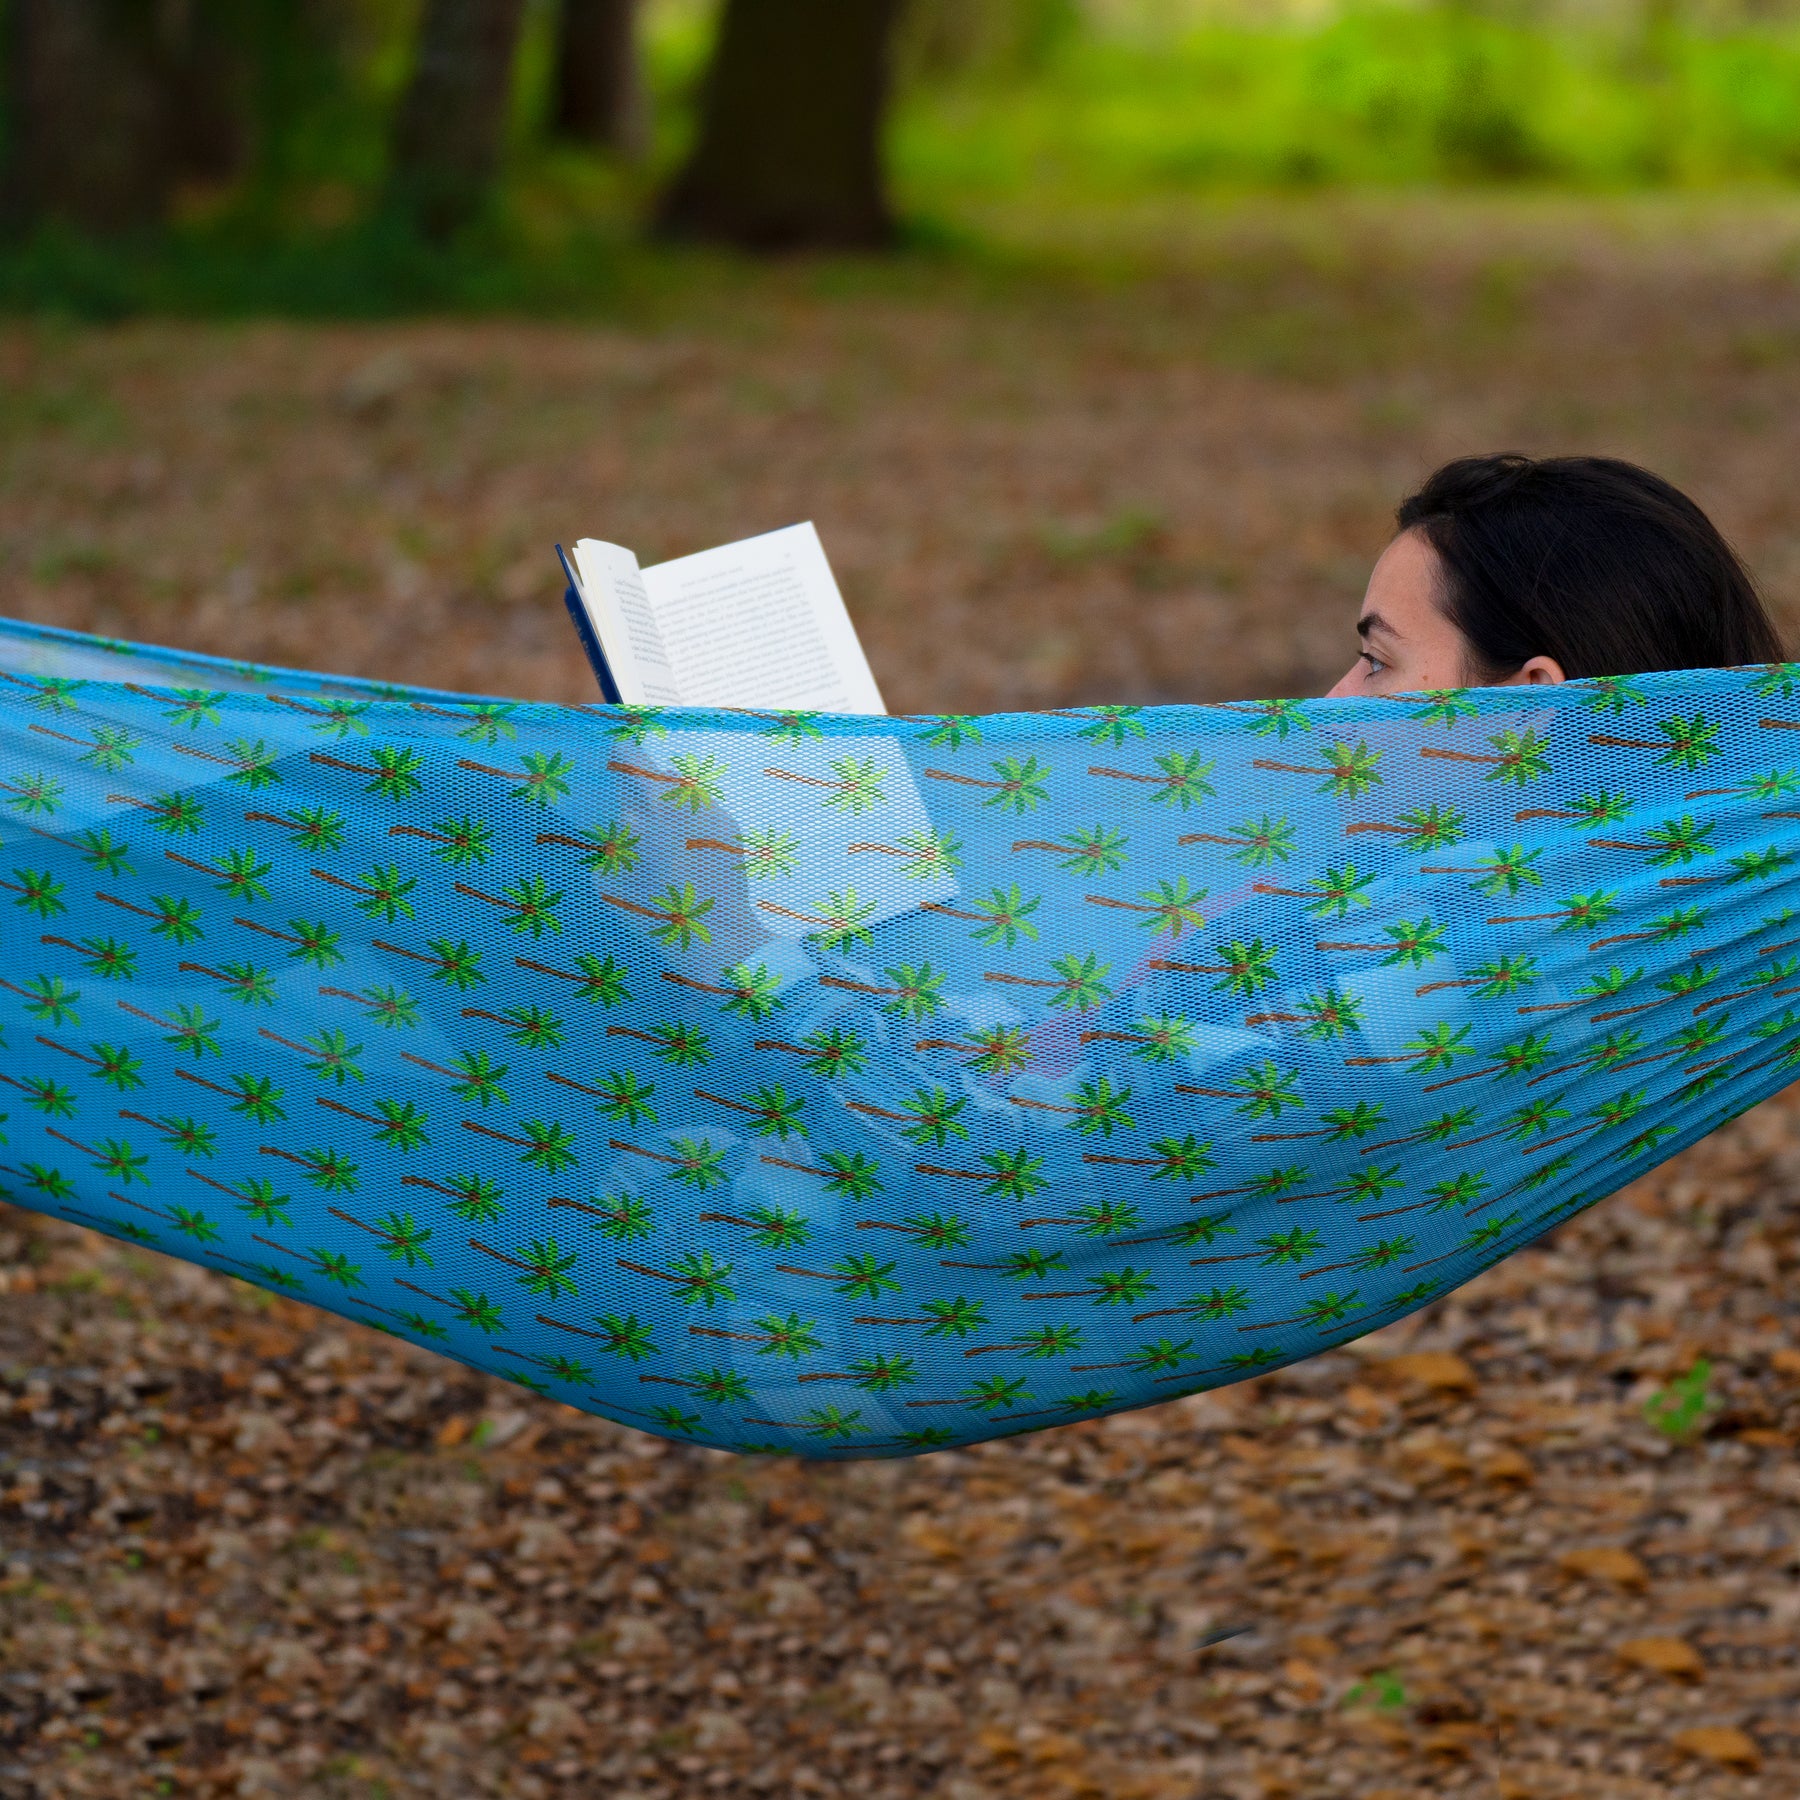 Person reading a book outside in the Bliss Hammocks 55-inch Mesh Hammock with a palm tree pattern.